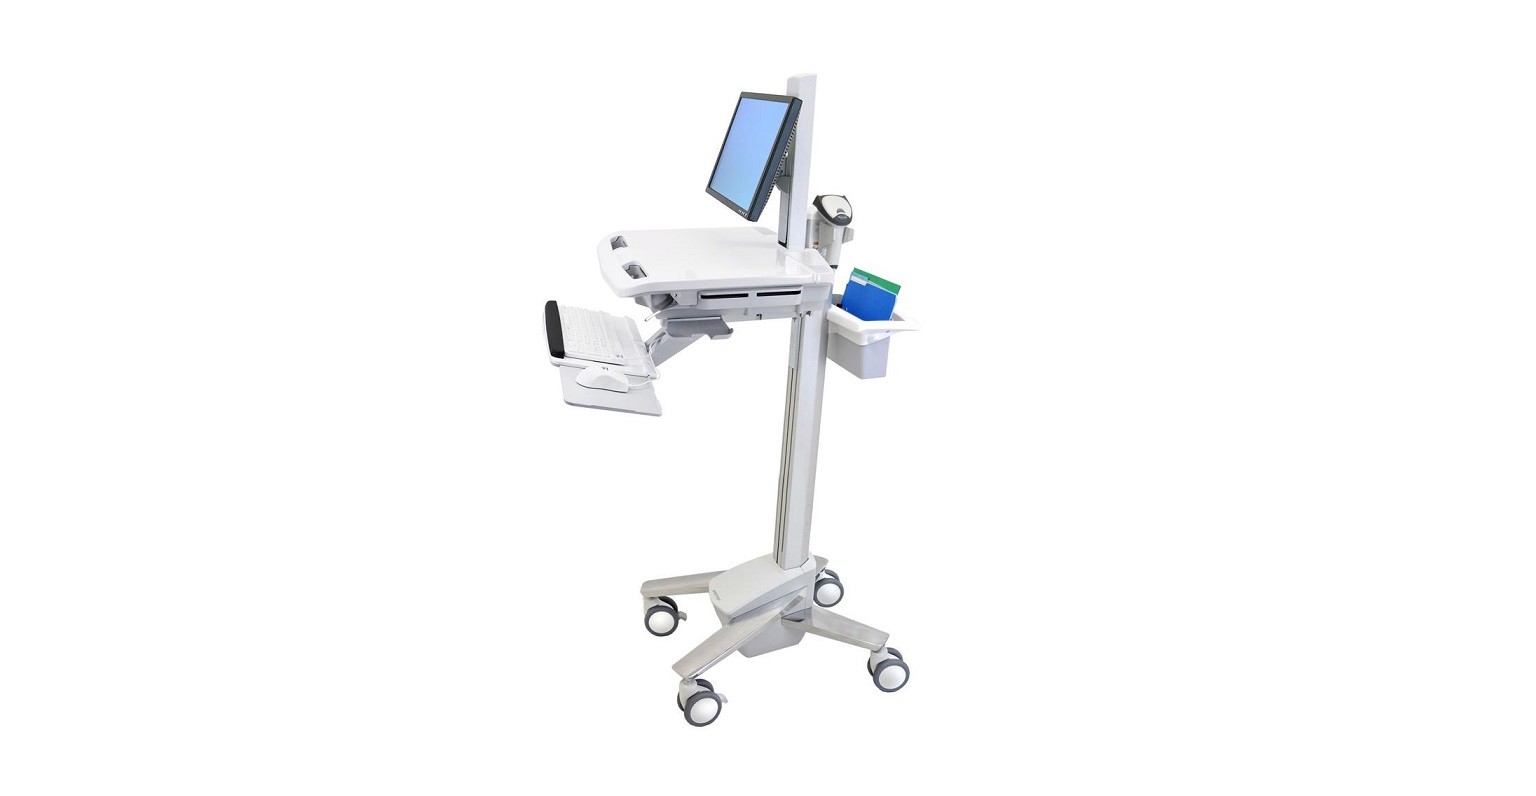 Ergotron SV41-6300-0 Styleview Emr Cart With LCD Pivot Cart